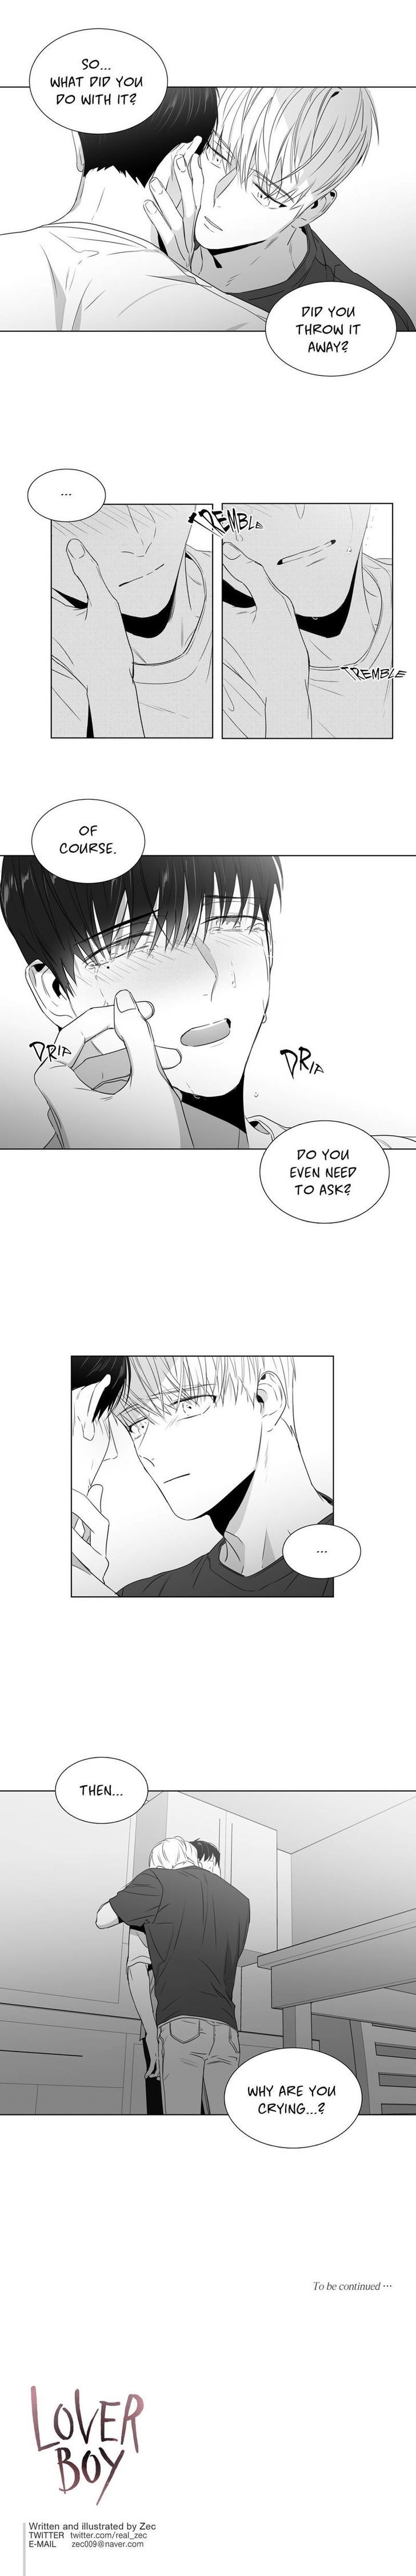 Lover Boy (Lezhin) Chapter 046 page 13